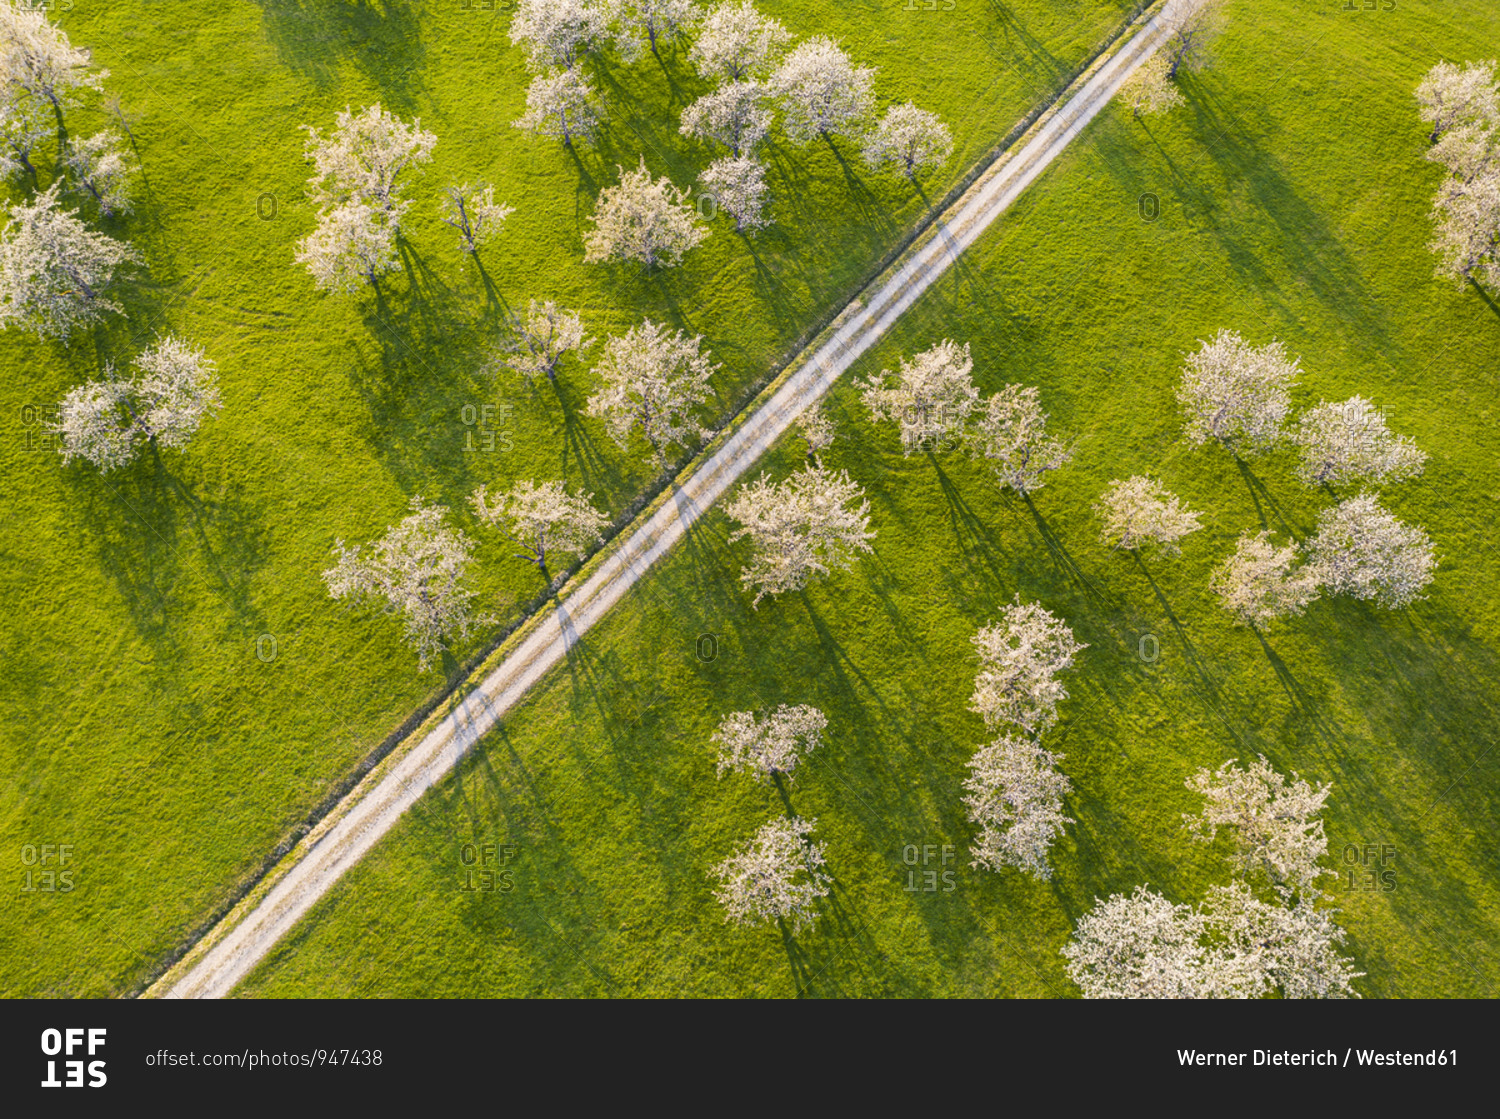 Germany- Baden-Wurttemberg- Beuren- Drone view of dirt road stretching across countryside orchard in spring